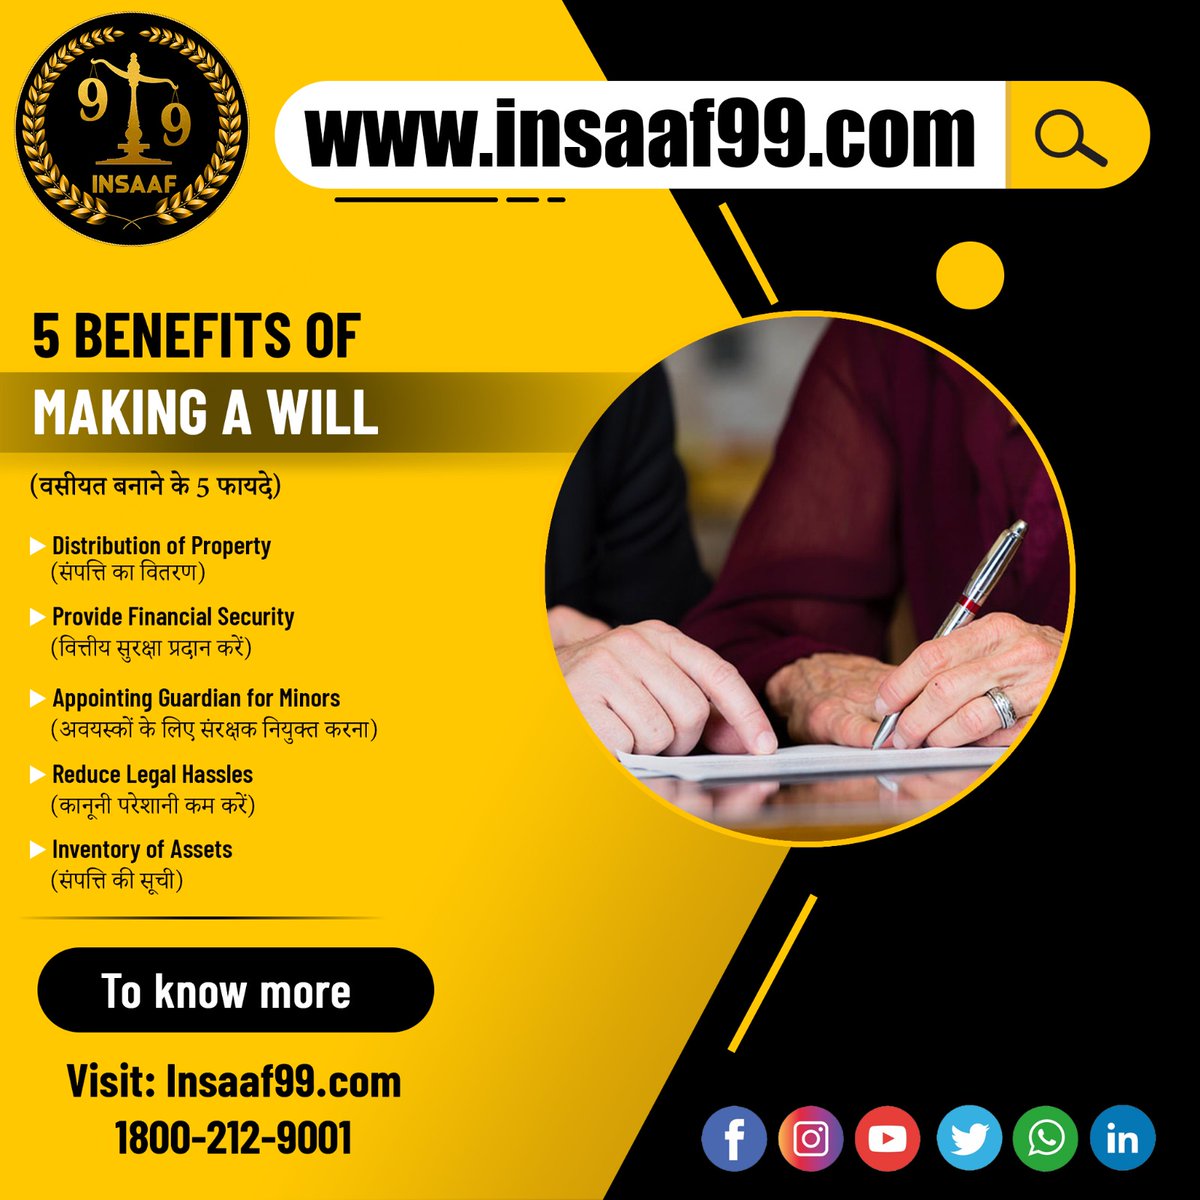 5 Benefits of Making a Will 
insaaf99.com/specialization…
#Reality_Of_RadhaSoami_Panth #InlovewithCricket #HisenseIndia #OperationSheeshMahal #legal #legalupdate #News #legaladvice #lawyers #legalconsultation